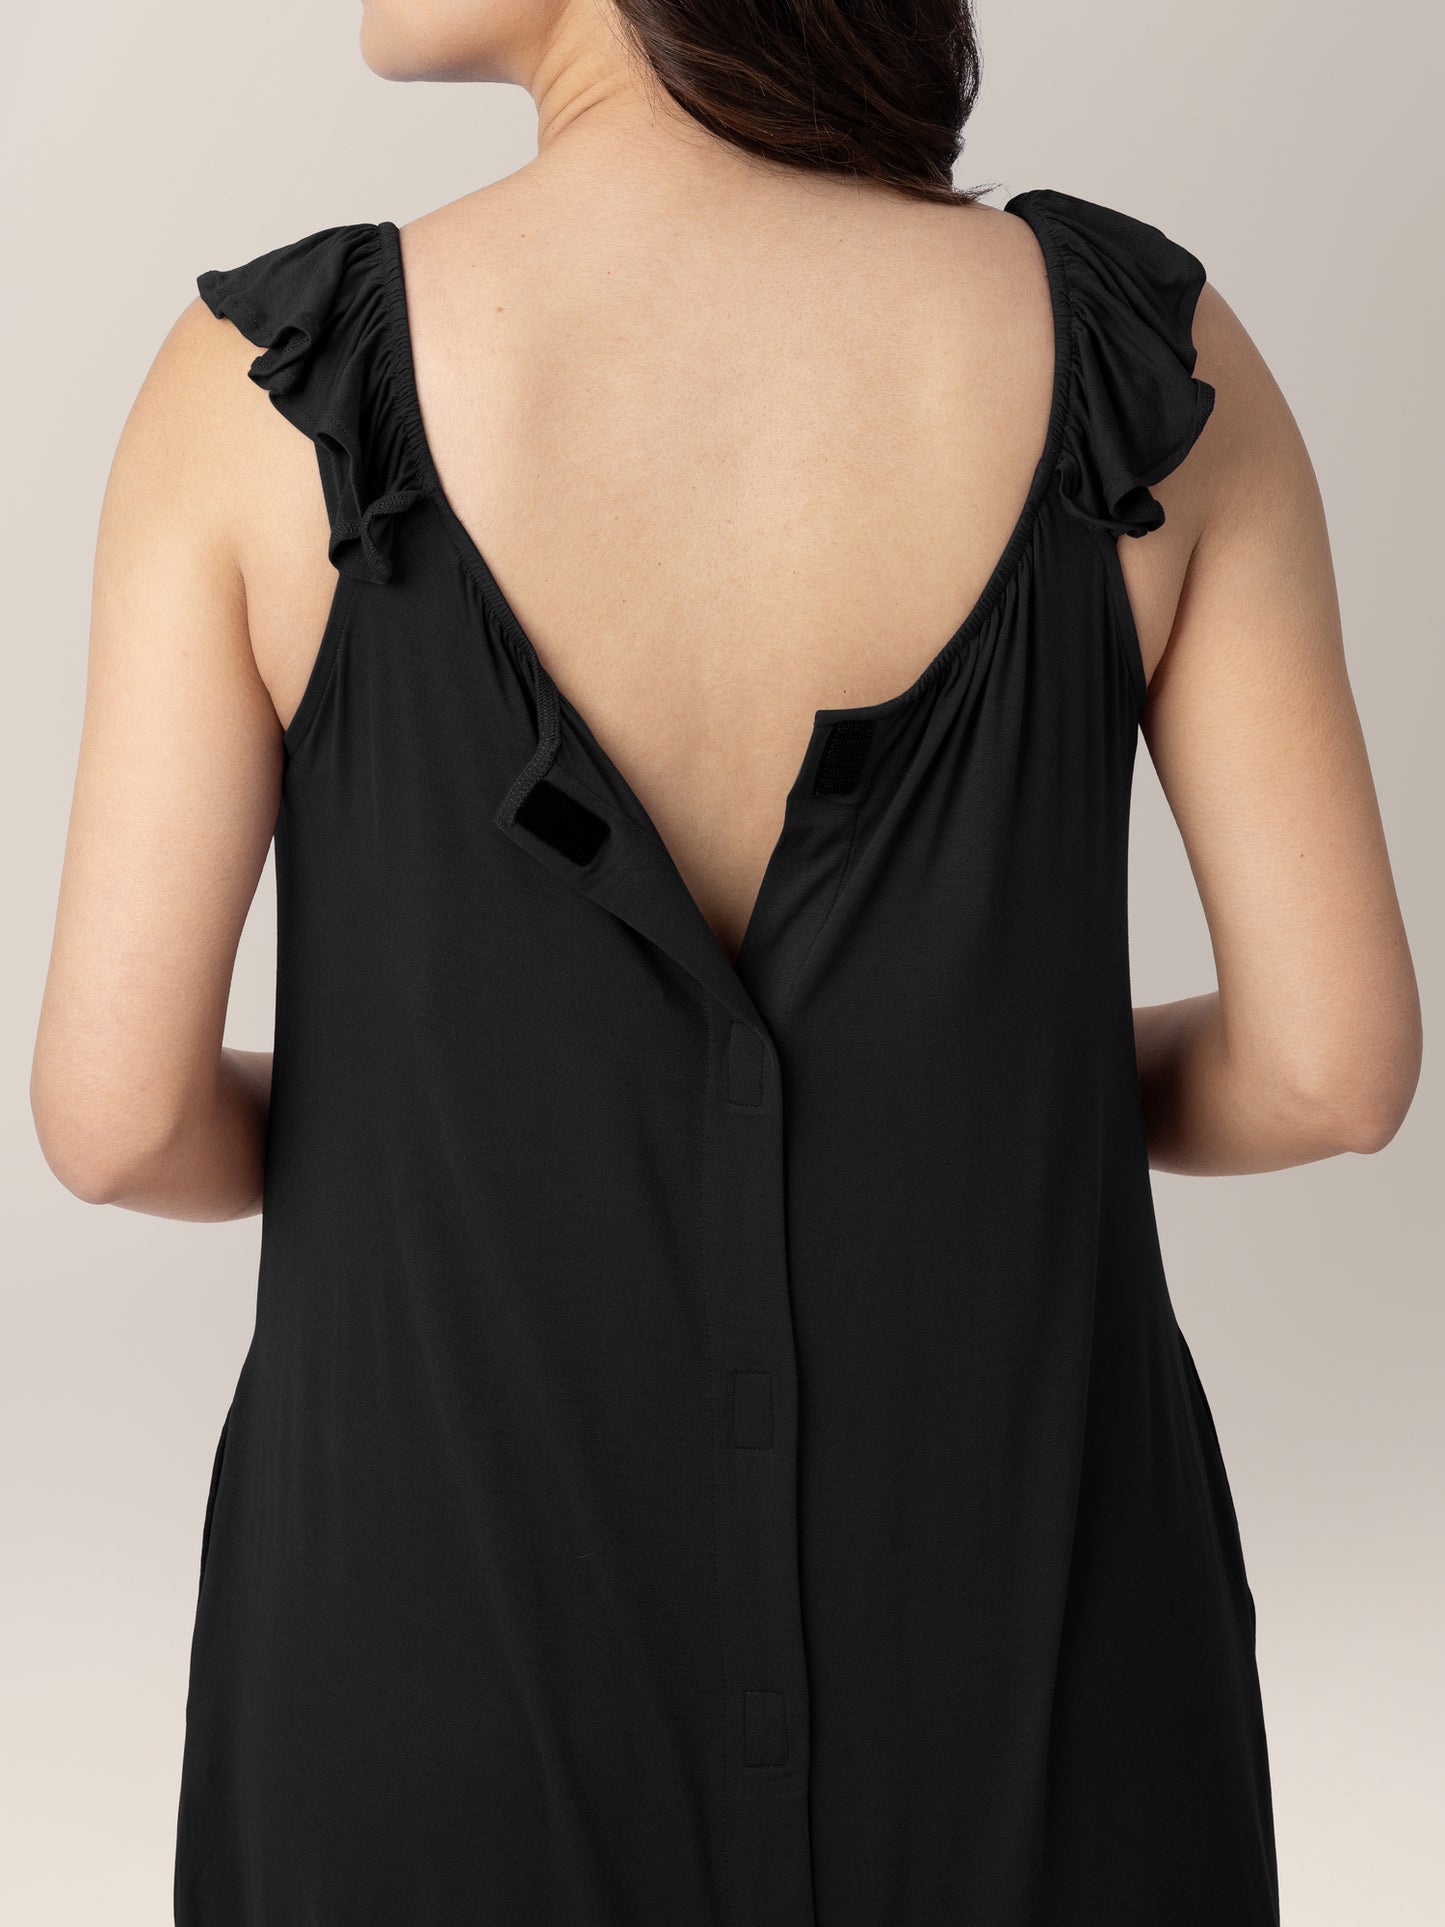 Closeup of the back of a pregnant model wearing the Ruffle Strap Labor & Delivery Gown in Black showing the easy velcro access.